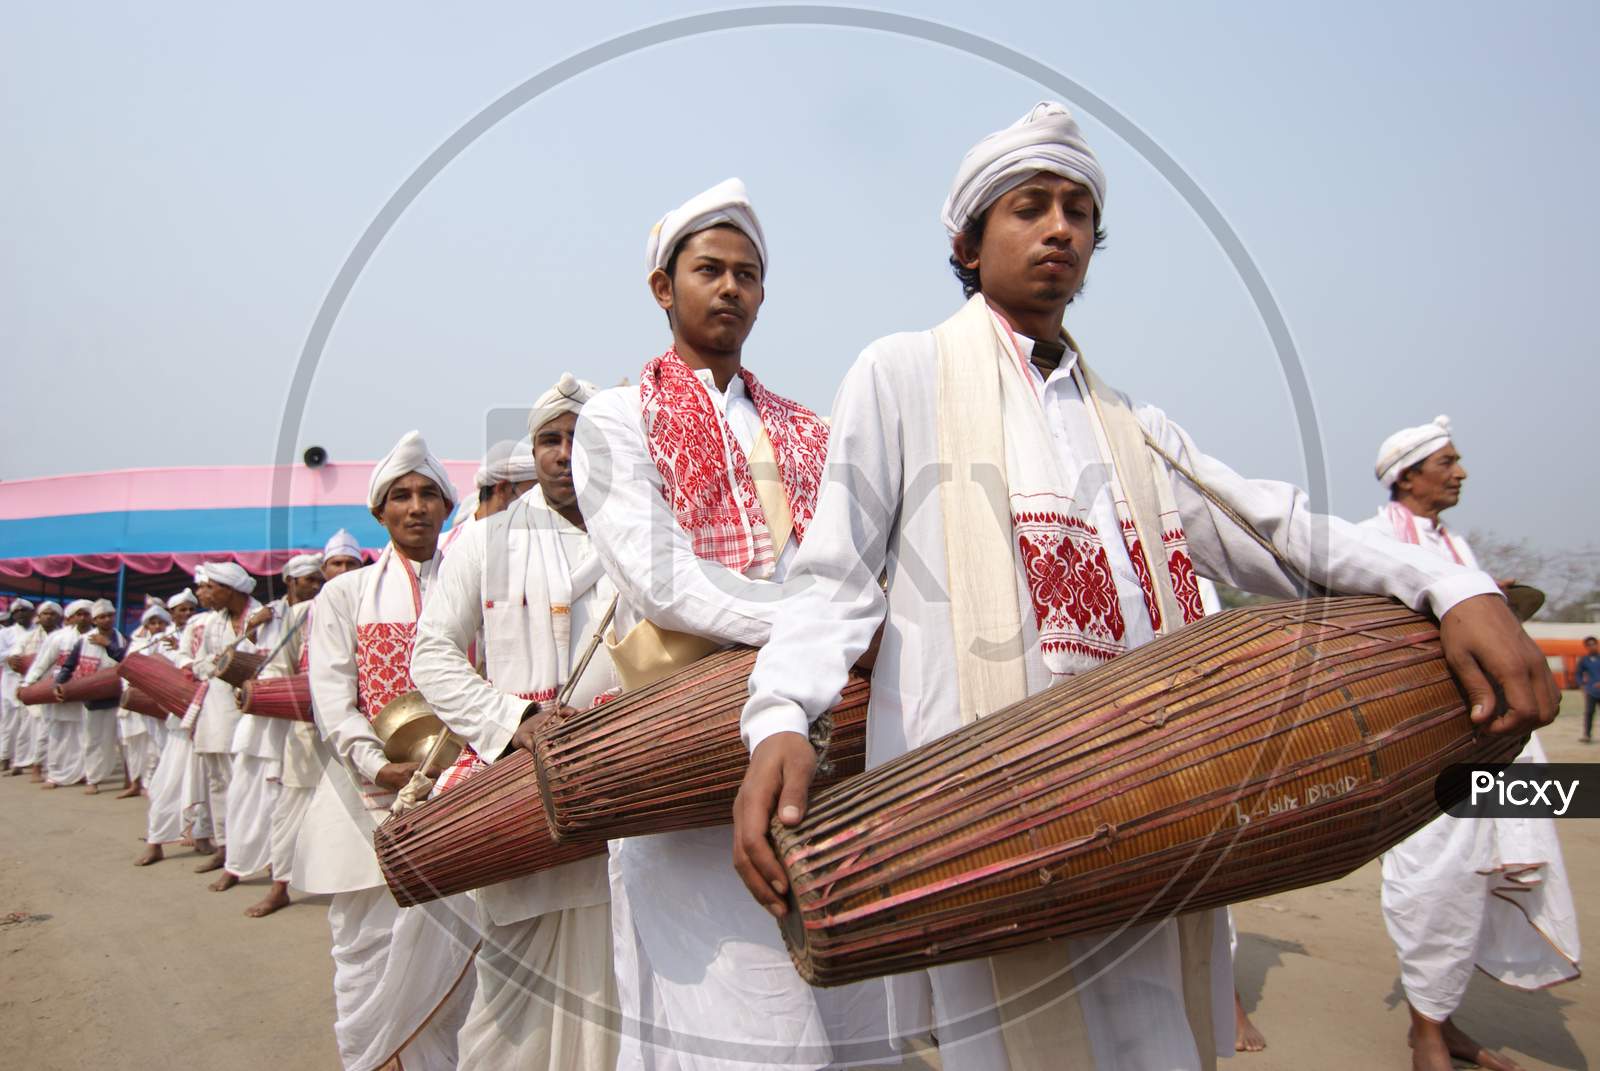 Artists Playing Dholak or Drums in Bihu Festival Celebrations